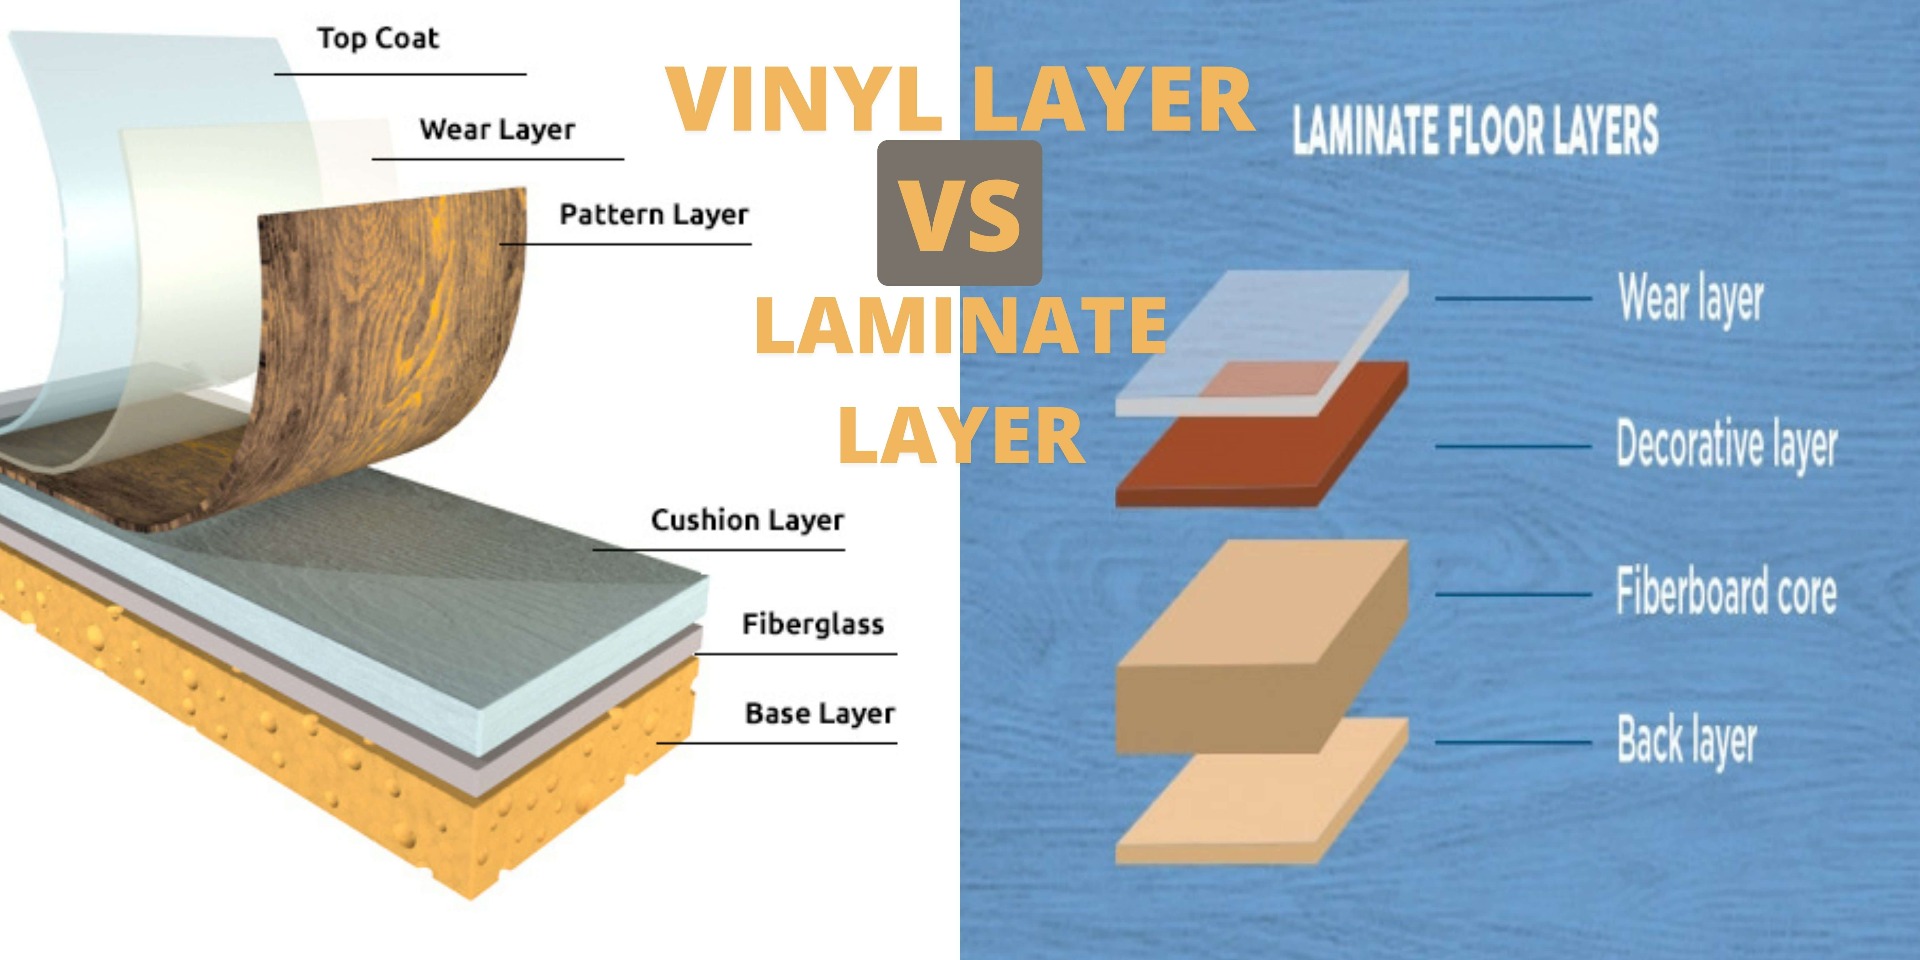 Laminate vs. Vinyl Flooring: What's the Difference?